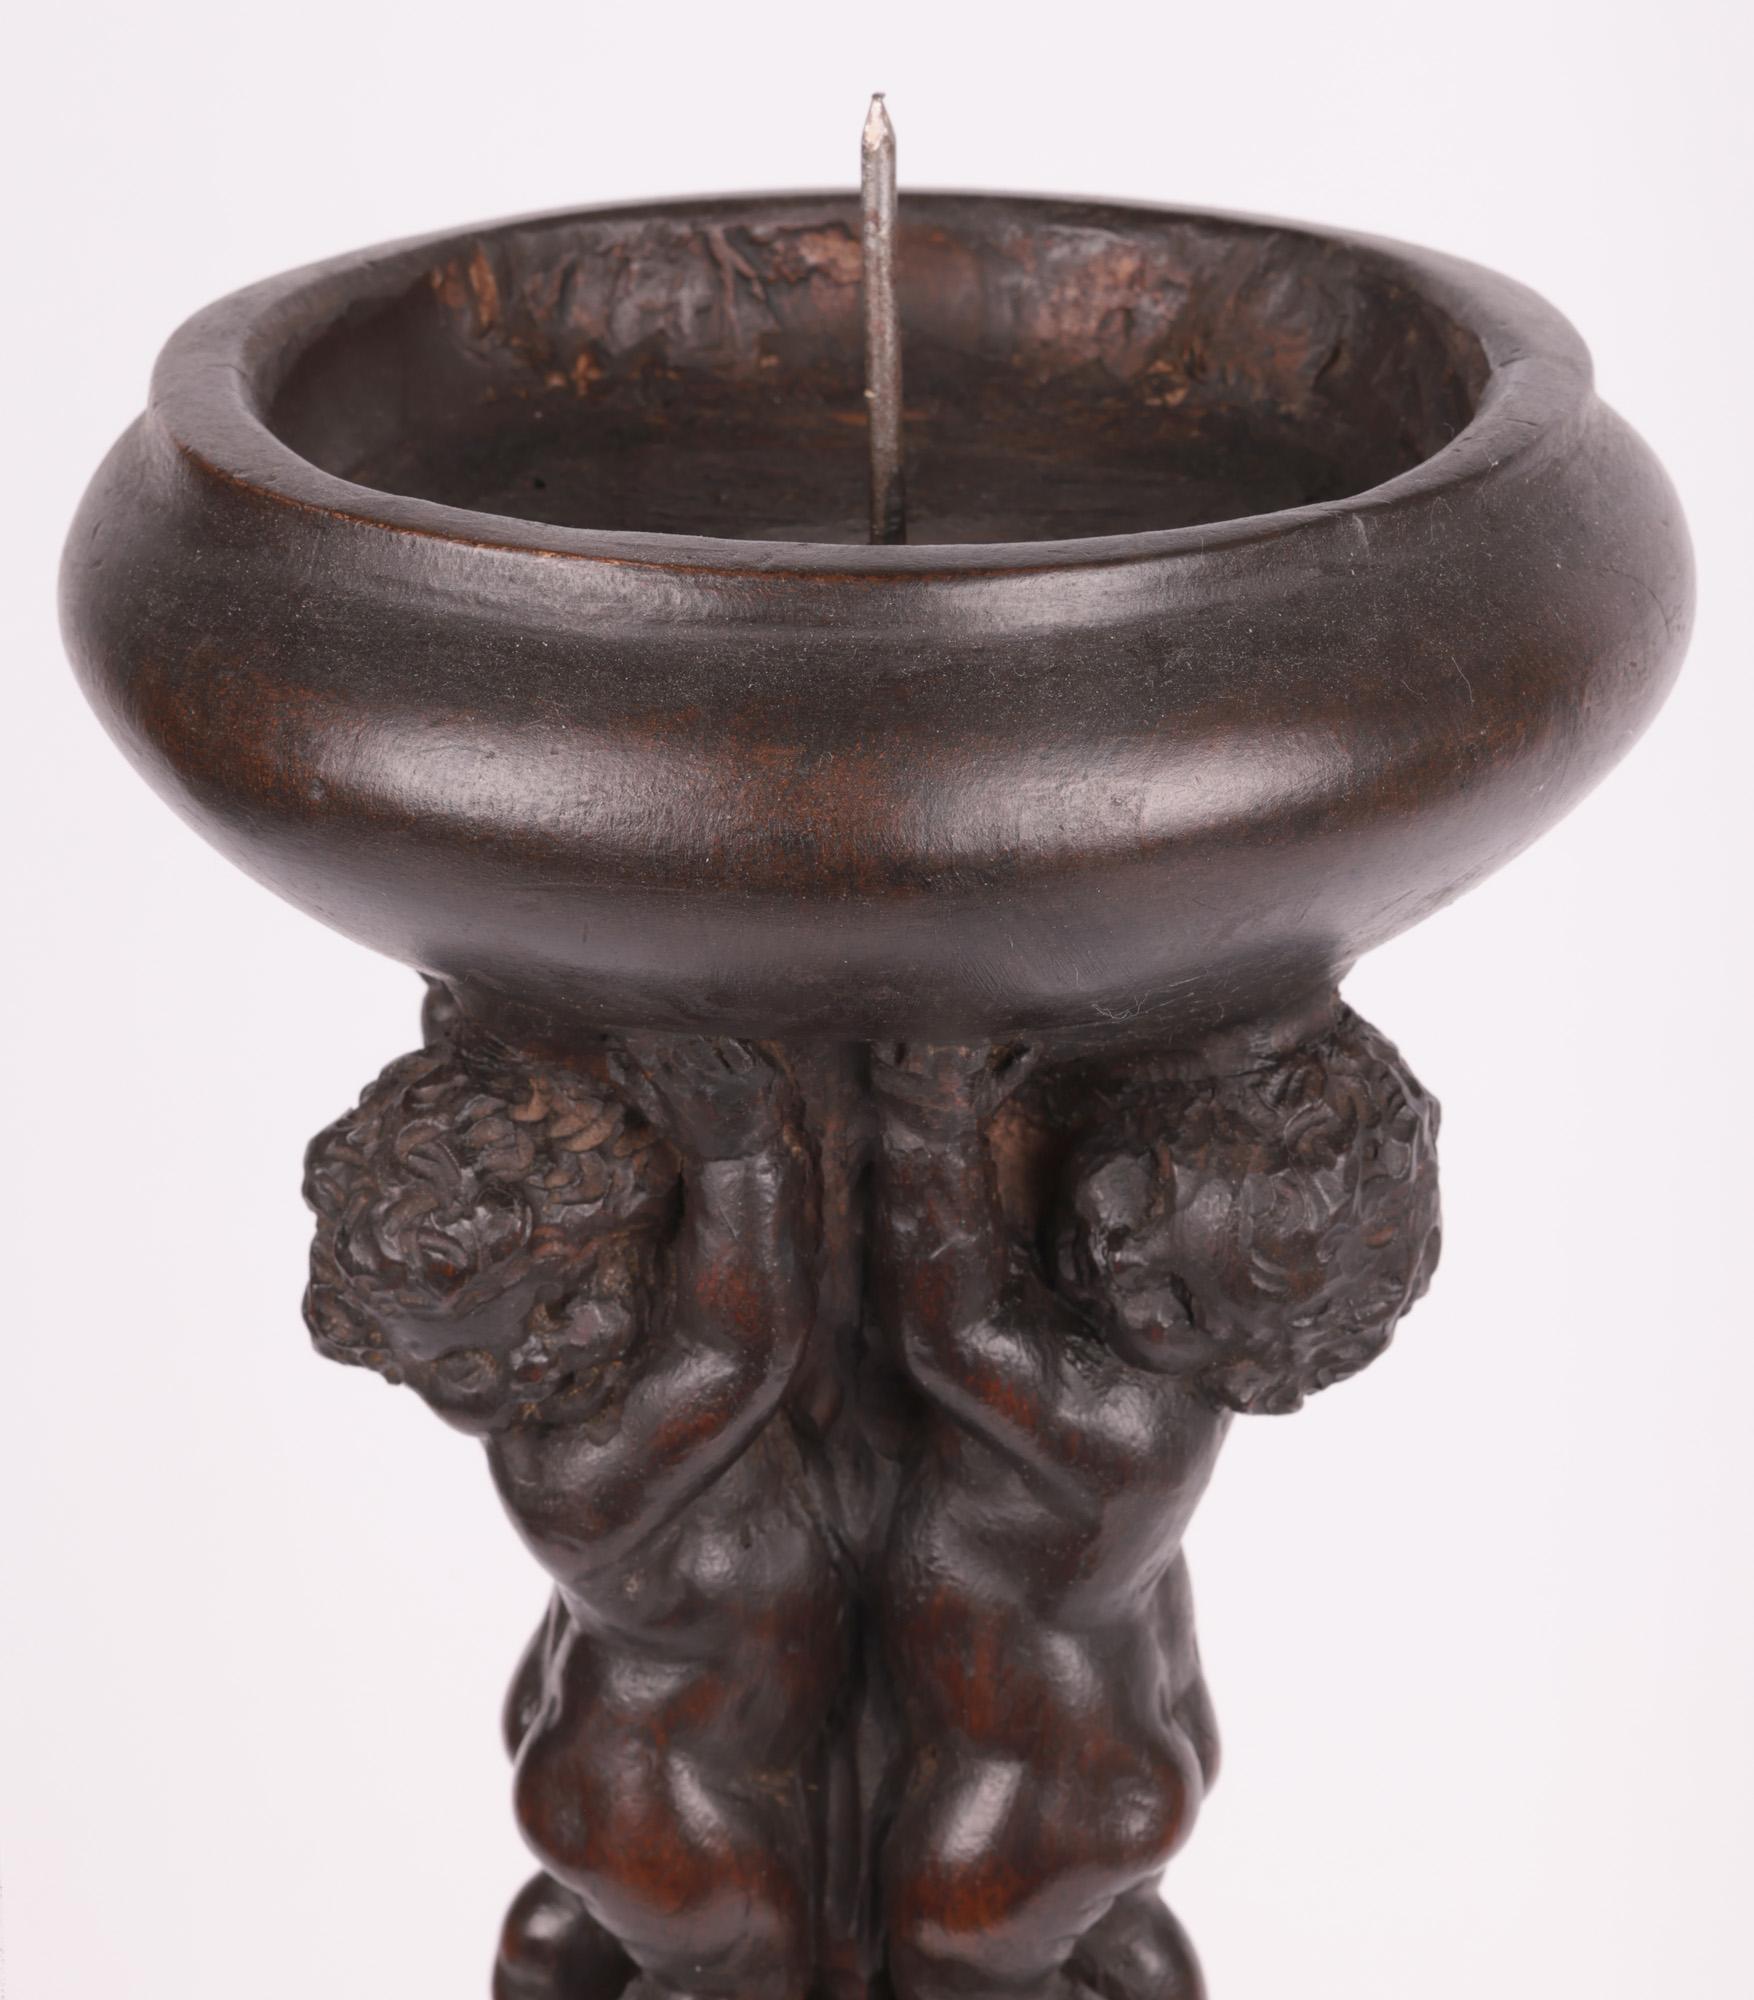 Flemish Carved Pricket Candlestick with Putti Late 16th or Early 17th Century For Sale 9